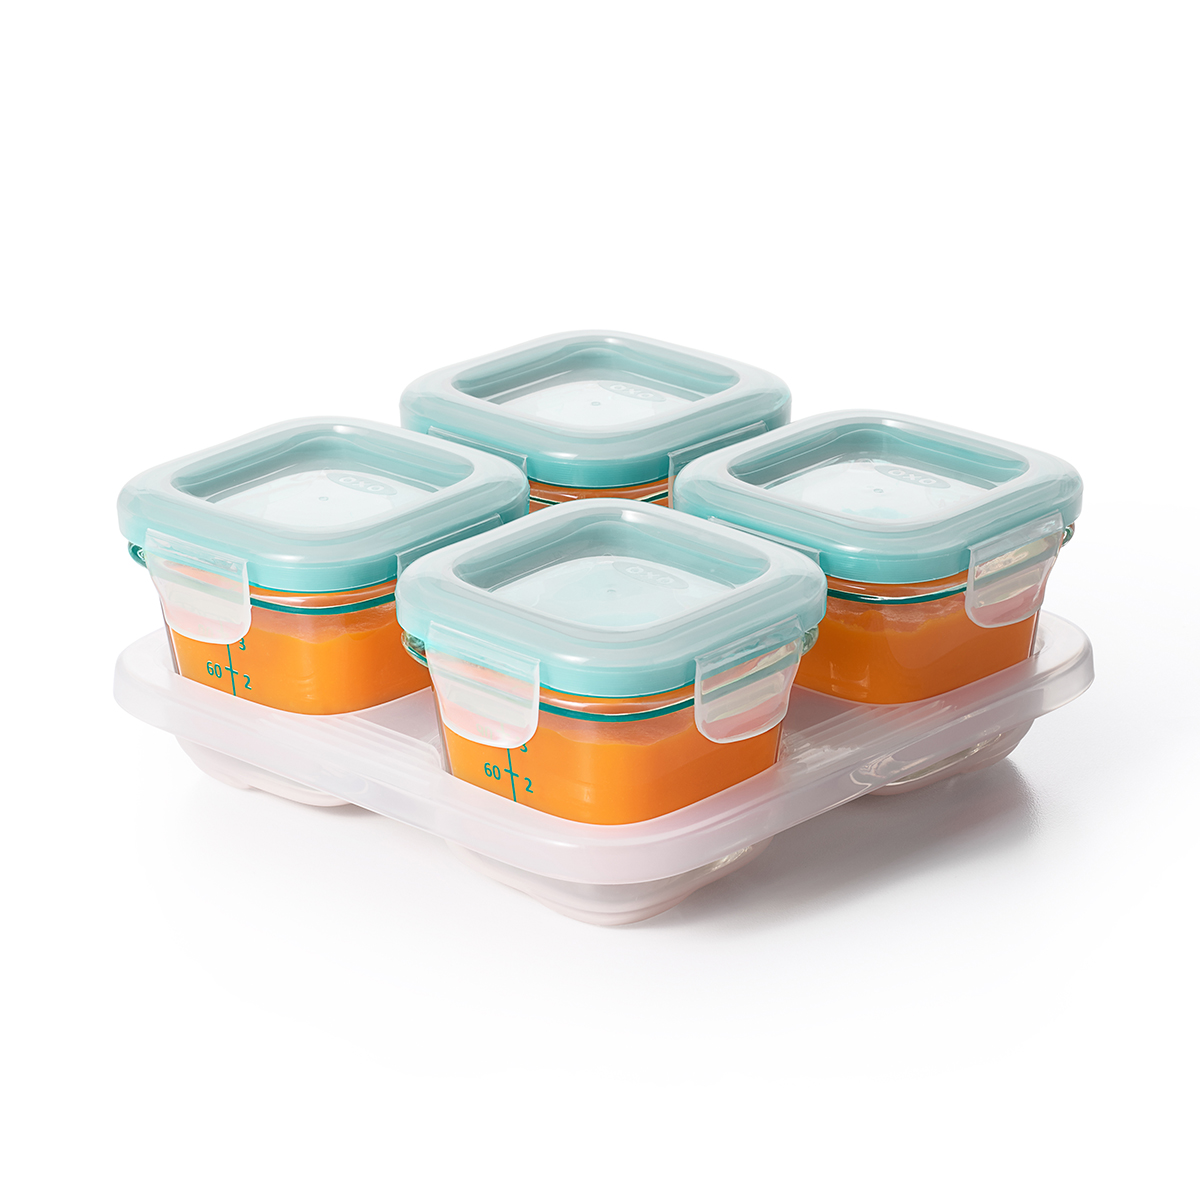 https://www.containerstore.com/catalogimages/405689/10082999%20TOT%20GLASS%20BABY%20BLOCK%20PACK%204.jpg